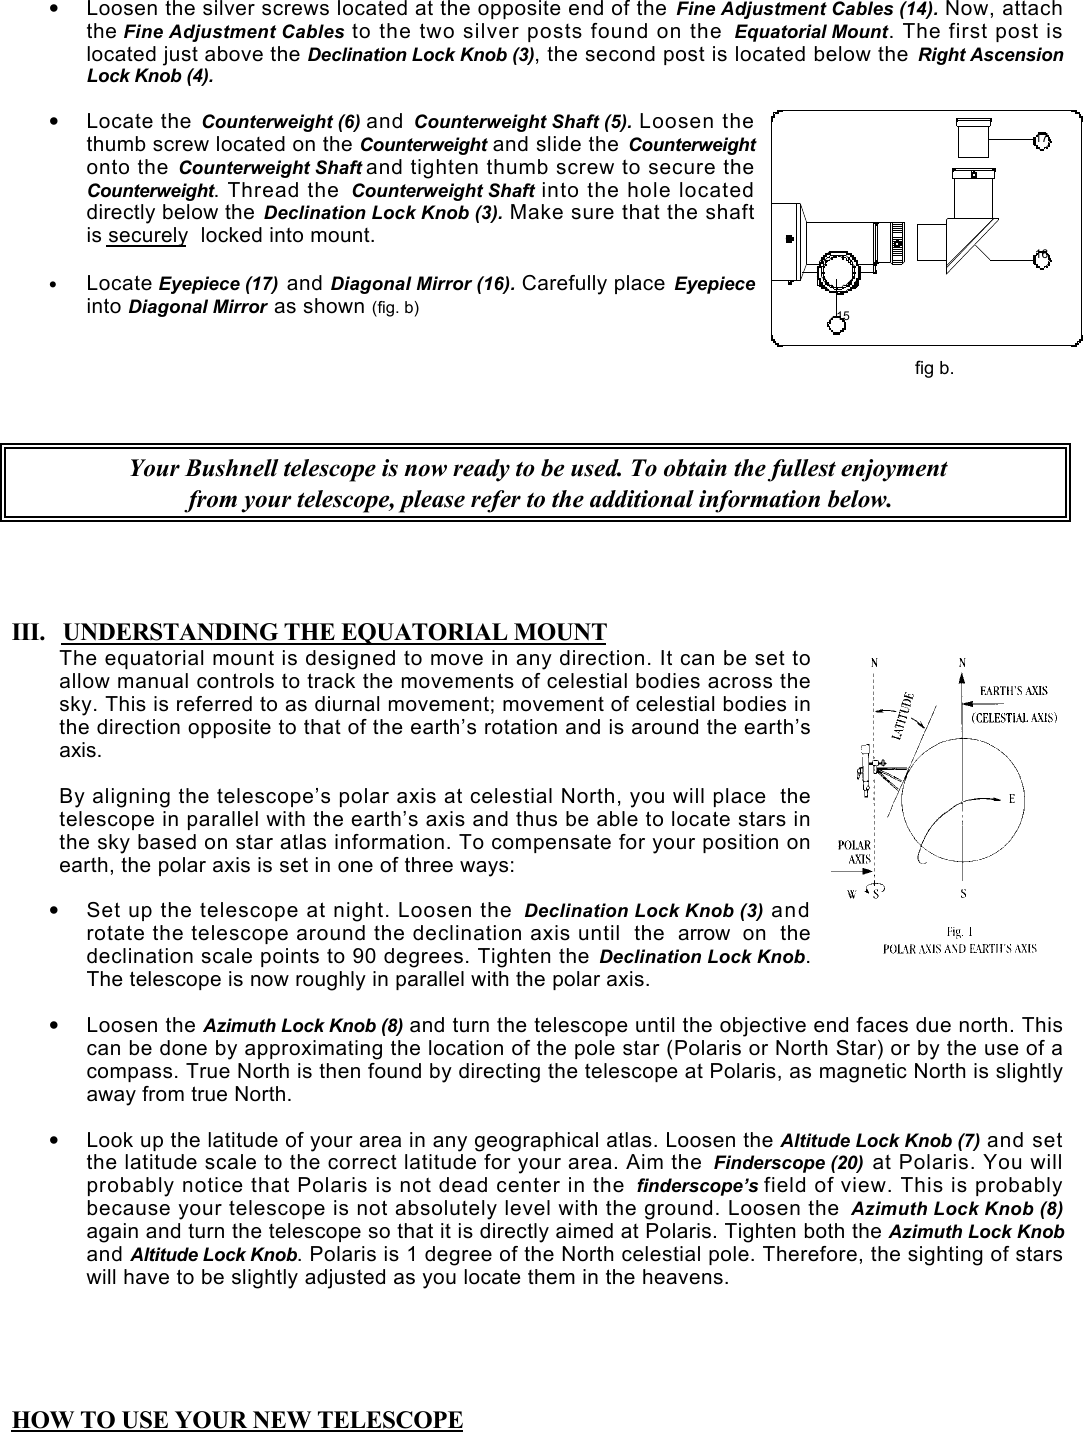 Page 3 of 5 - Bushnell Bushnell-Deep-Space-Series-78-9519-Users-Manual-  Bushnell-deep-space-series-78-9519-users-manual